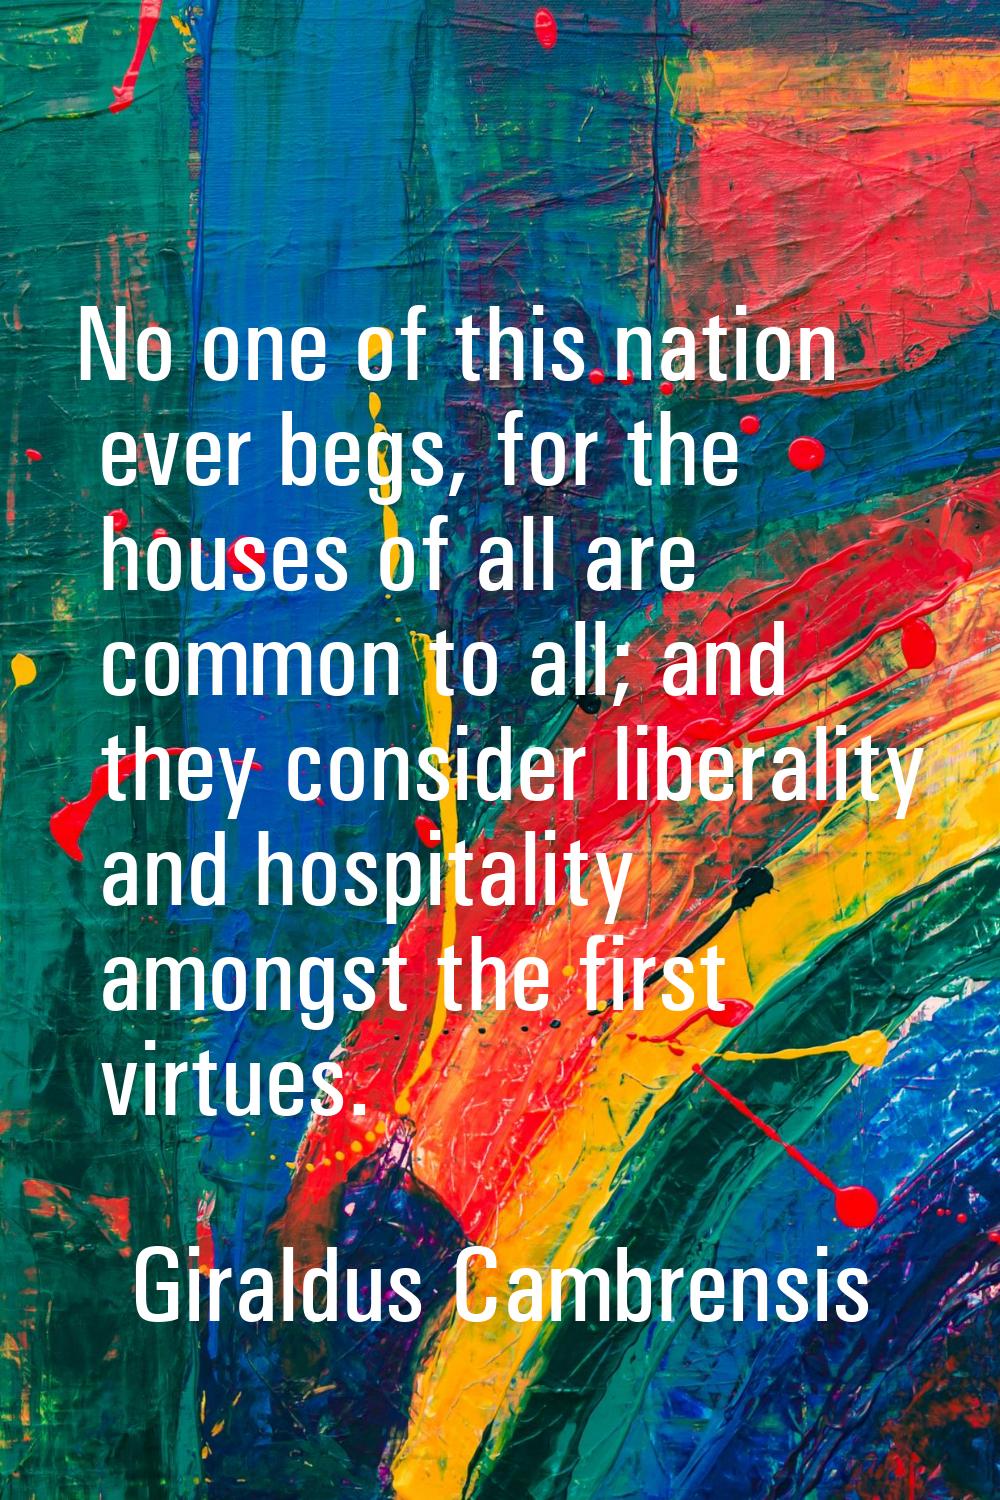 No one of this nation ever begs, for the houses of all are common to all; and they consider liberal